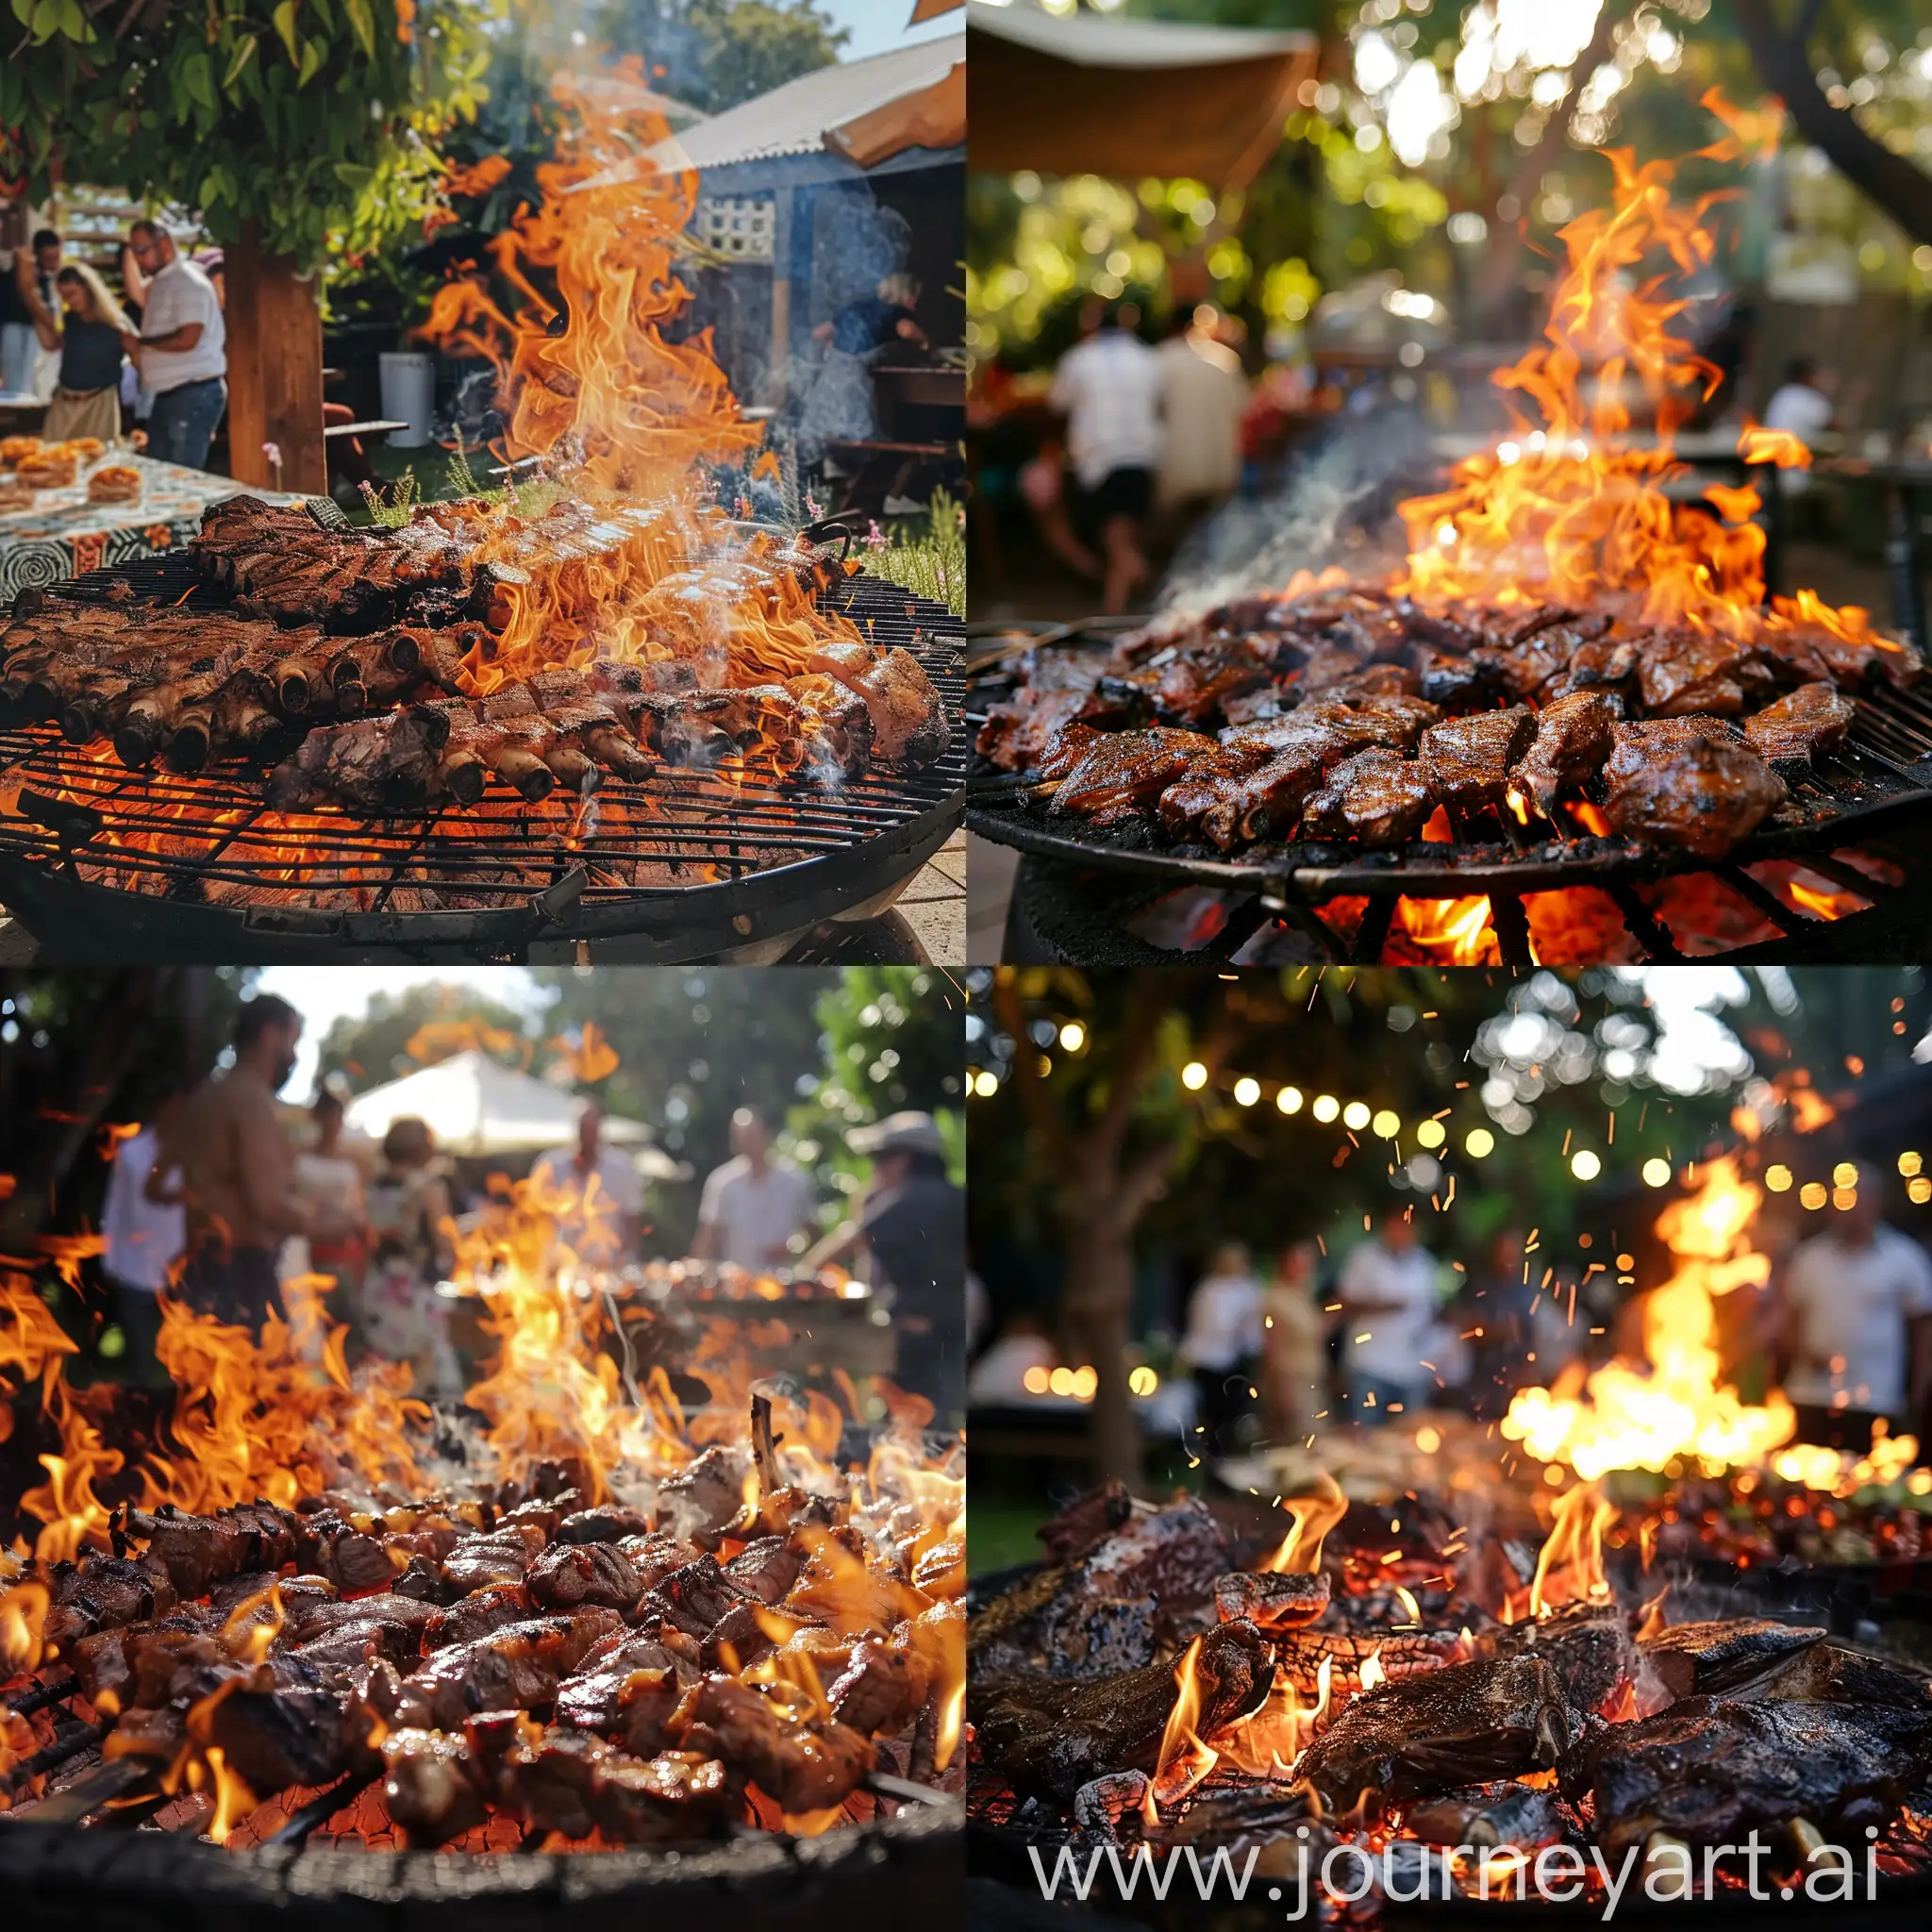 south african braai/barbecue, in a backyard, party lots of people, super big fire burning the meat, high quality image